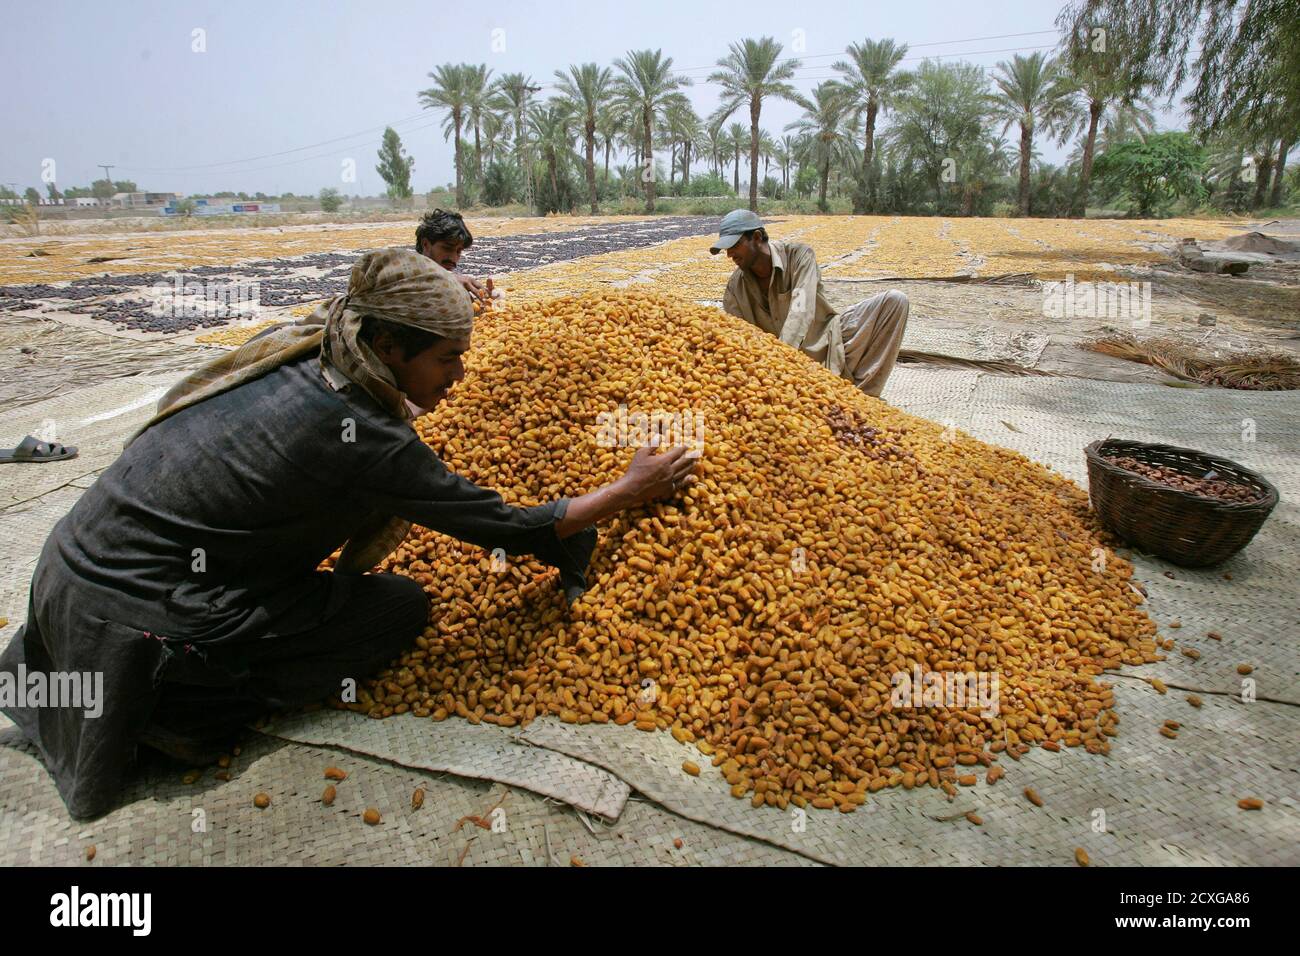 Men sort dates after they were dried at a farm during harvesting season in  Larkana in Pakistan's Sindh province July 30, 2012. According to Islamic  traditions, dates are eaten to break the